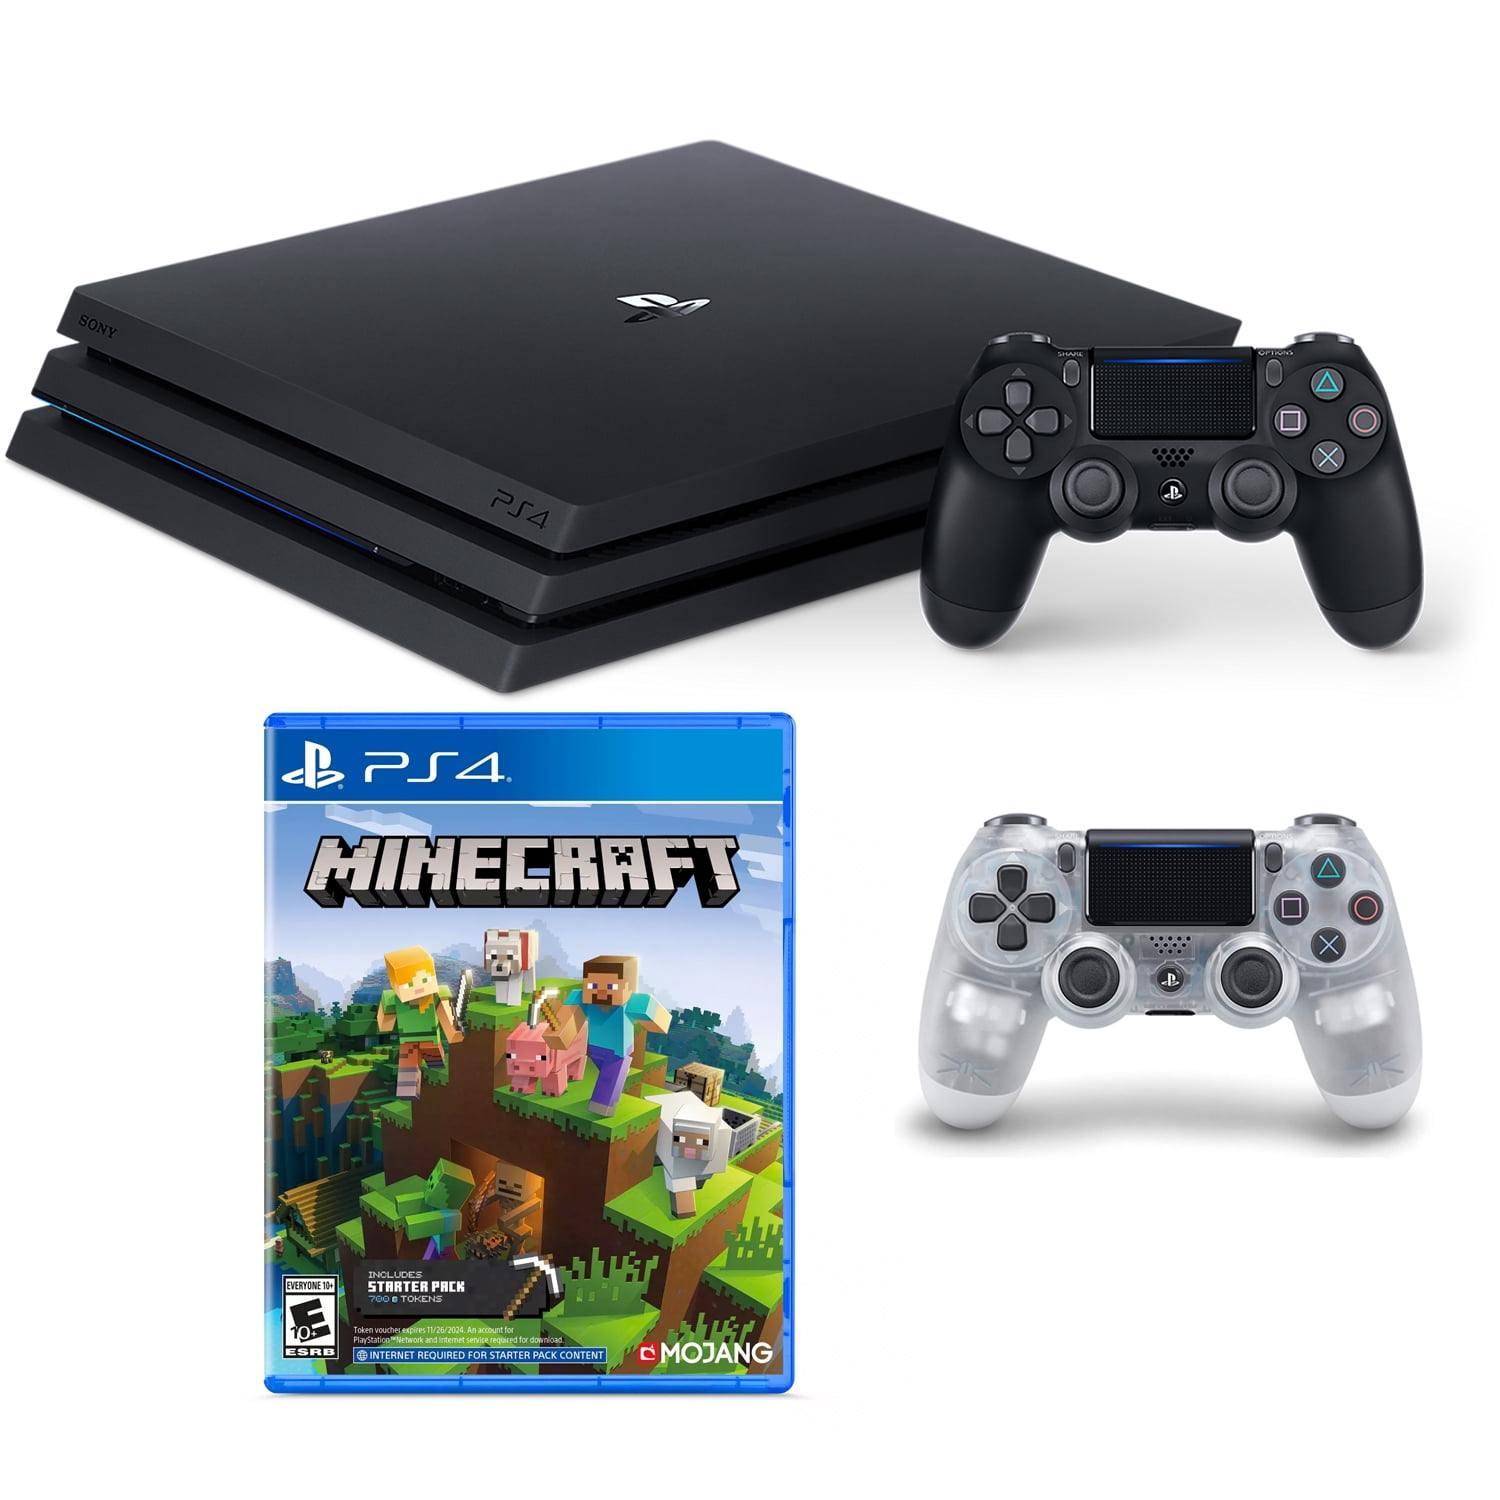 Minecraft Game Ps4 Console And Crystal Controller Bundle Sony Playstation 4 Walmart Com